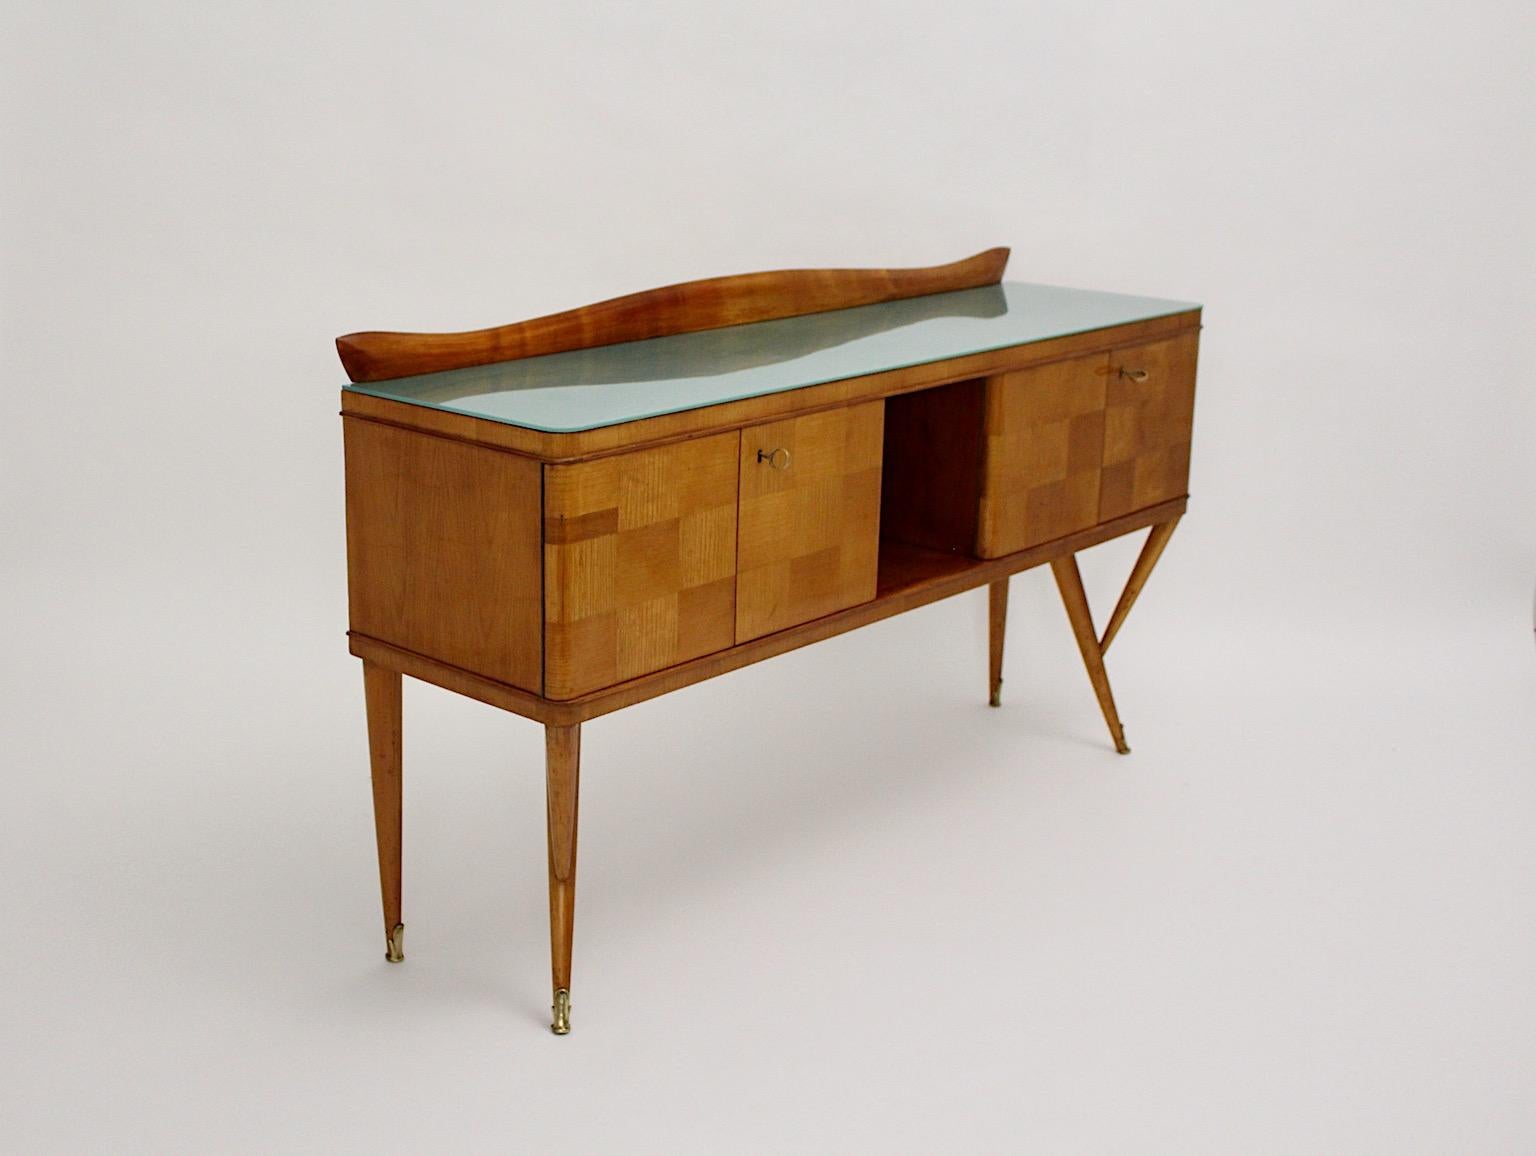 Mid Century Modern vintage sideboard Ico Parisi style from solid cherrywood topped with green turquoise teal glass plate and beautiful brass details designed and manufactured Italy 1940s.
This cherrywood shows warmth and depth with a chess like